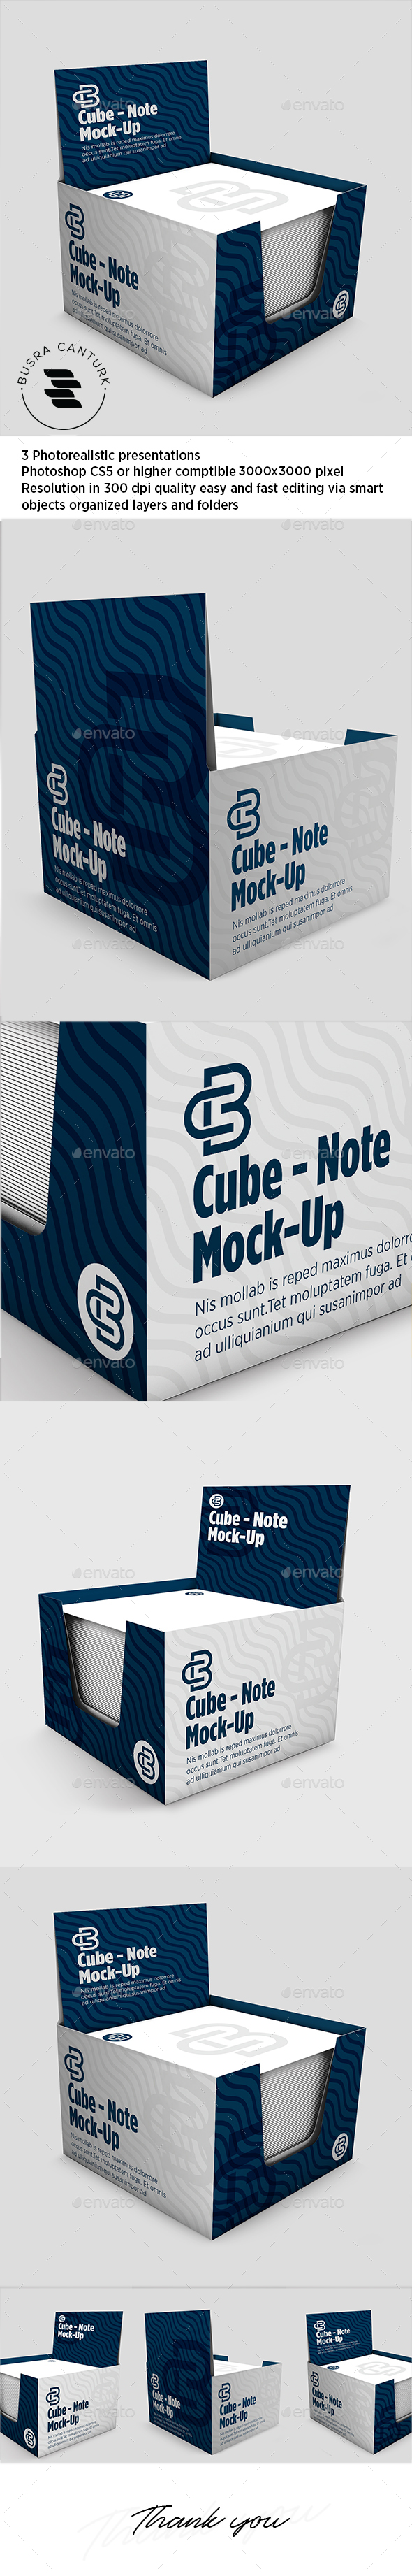 Download Cube Note Mock Up By Busracanturk50 Graphicriver